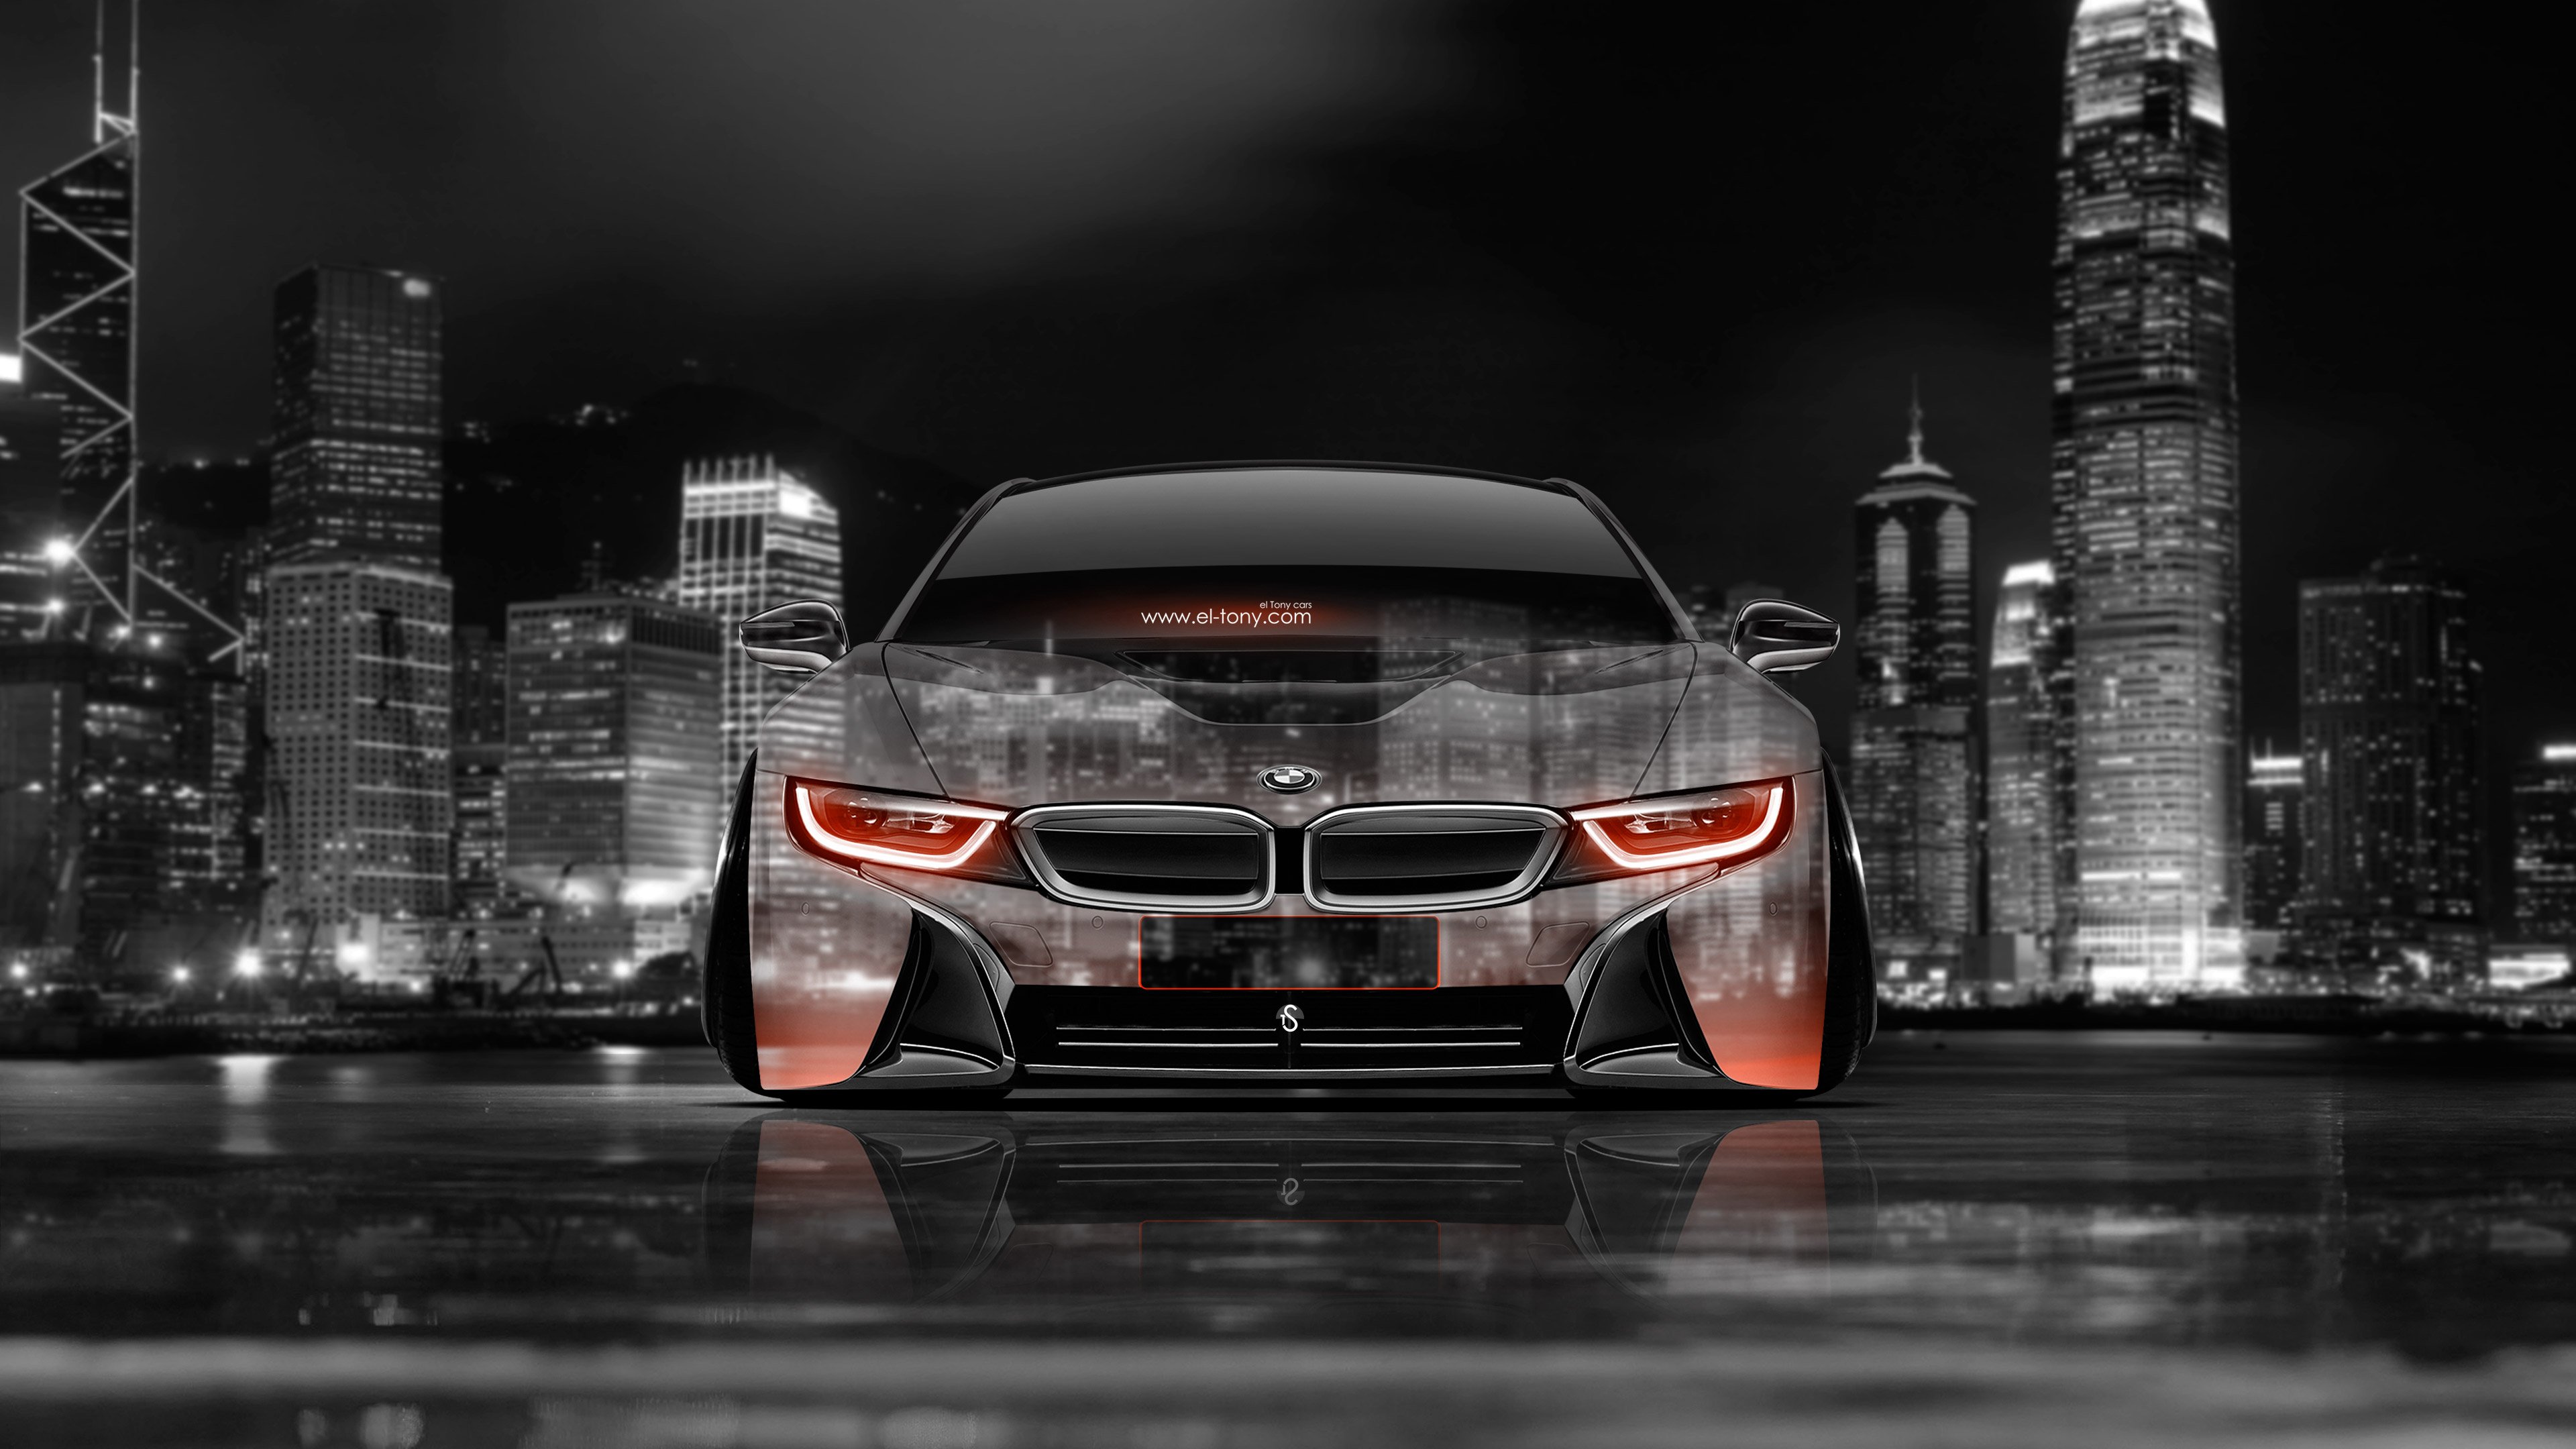 BMW i8 Front Crystal City Car 2014 Orange Neon 4K Wallpapers design by 3840x2160